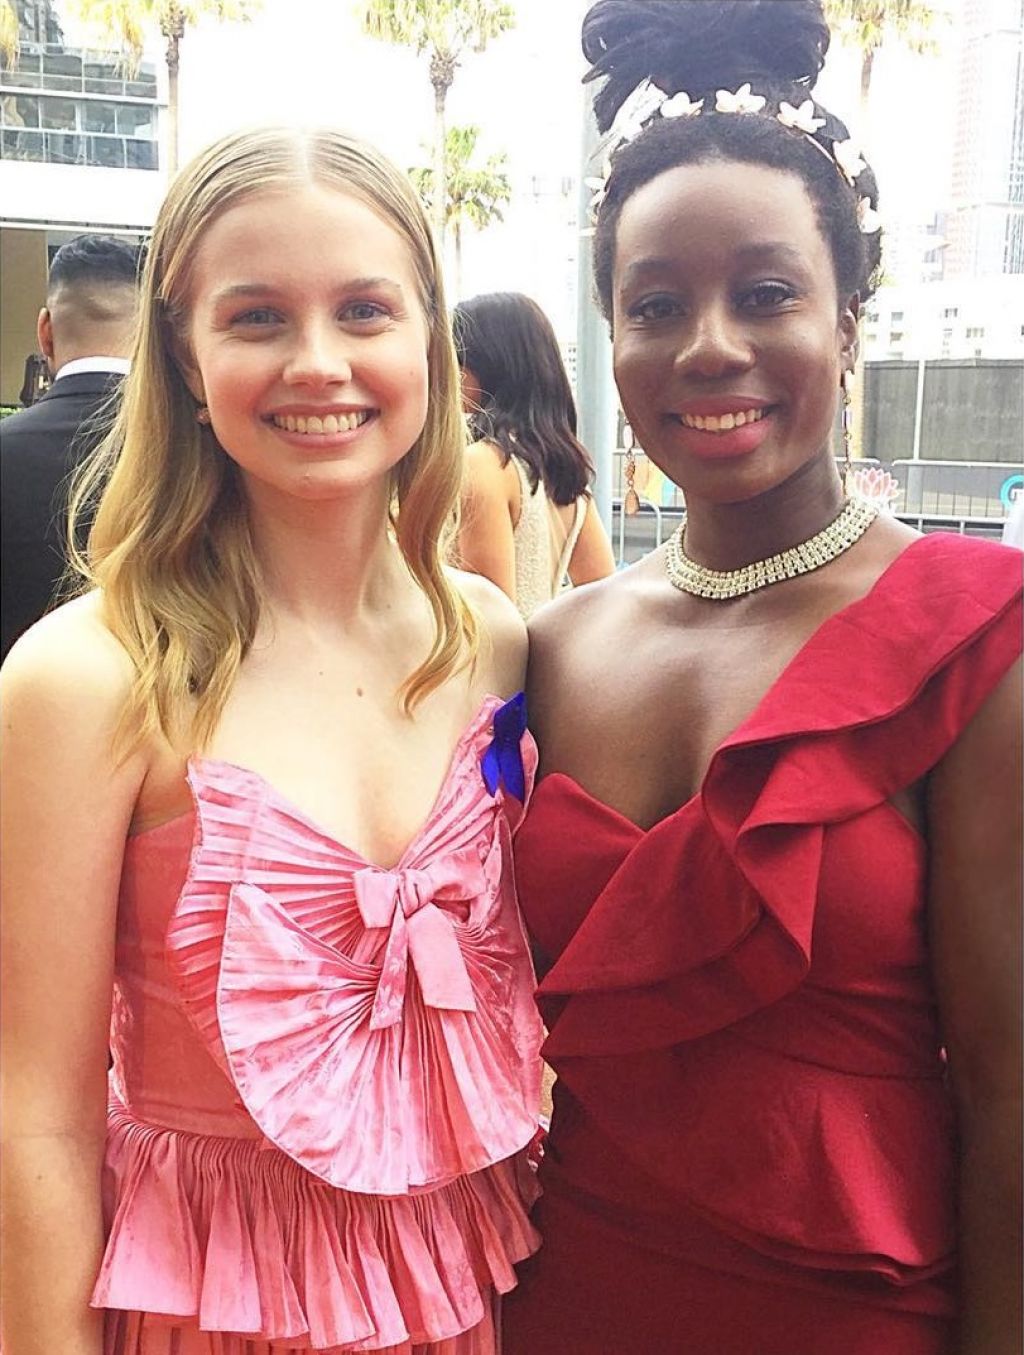 Angourie Rice - Personal Pics 01/01/2019.